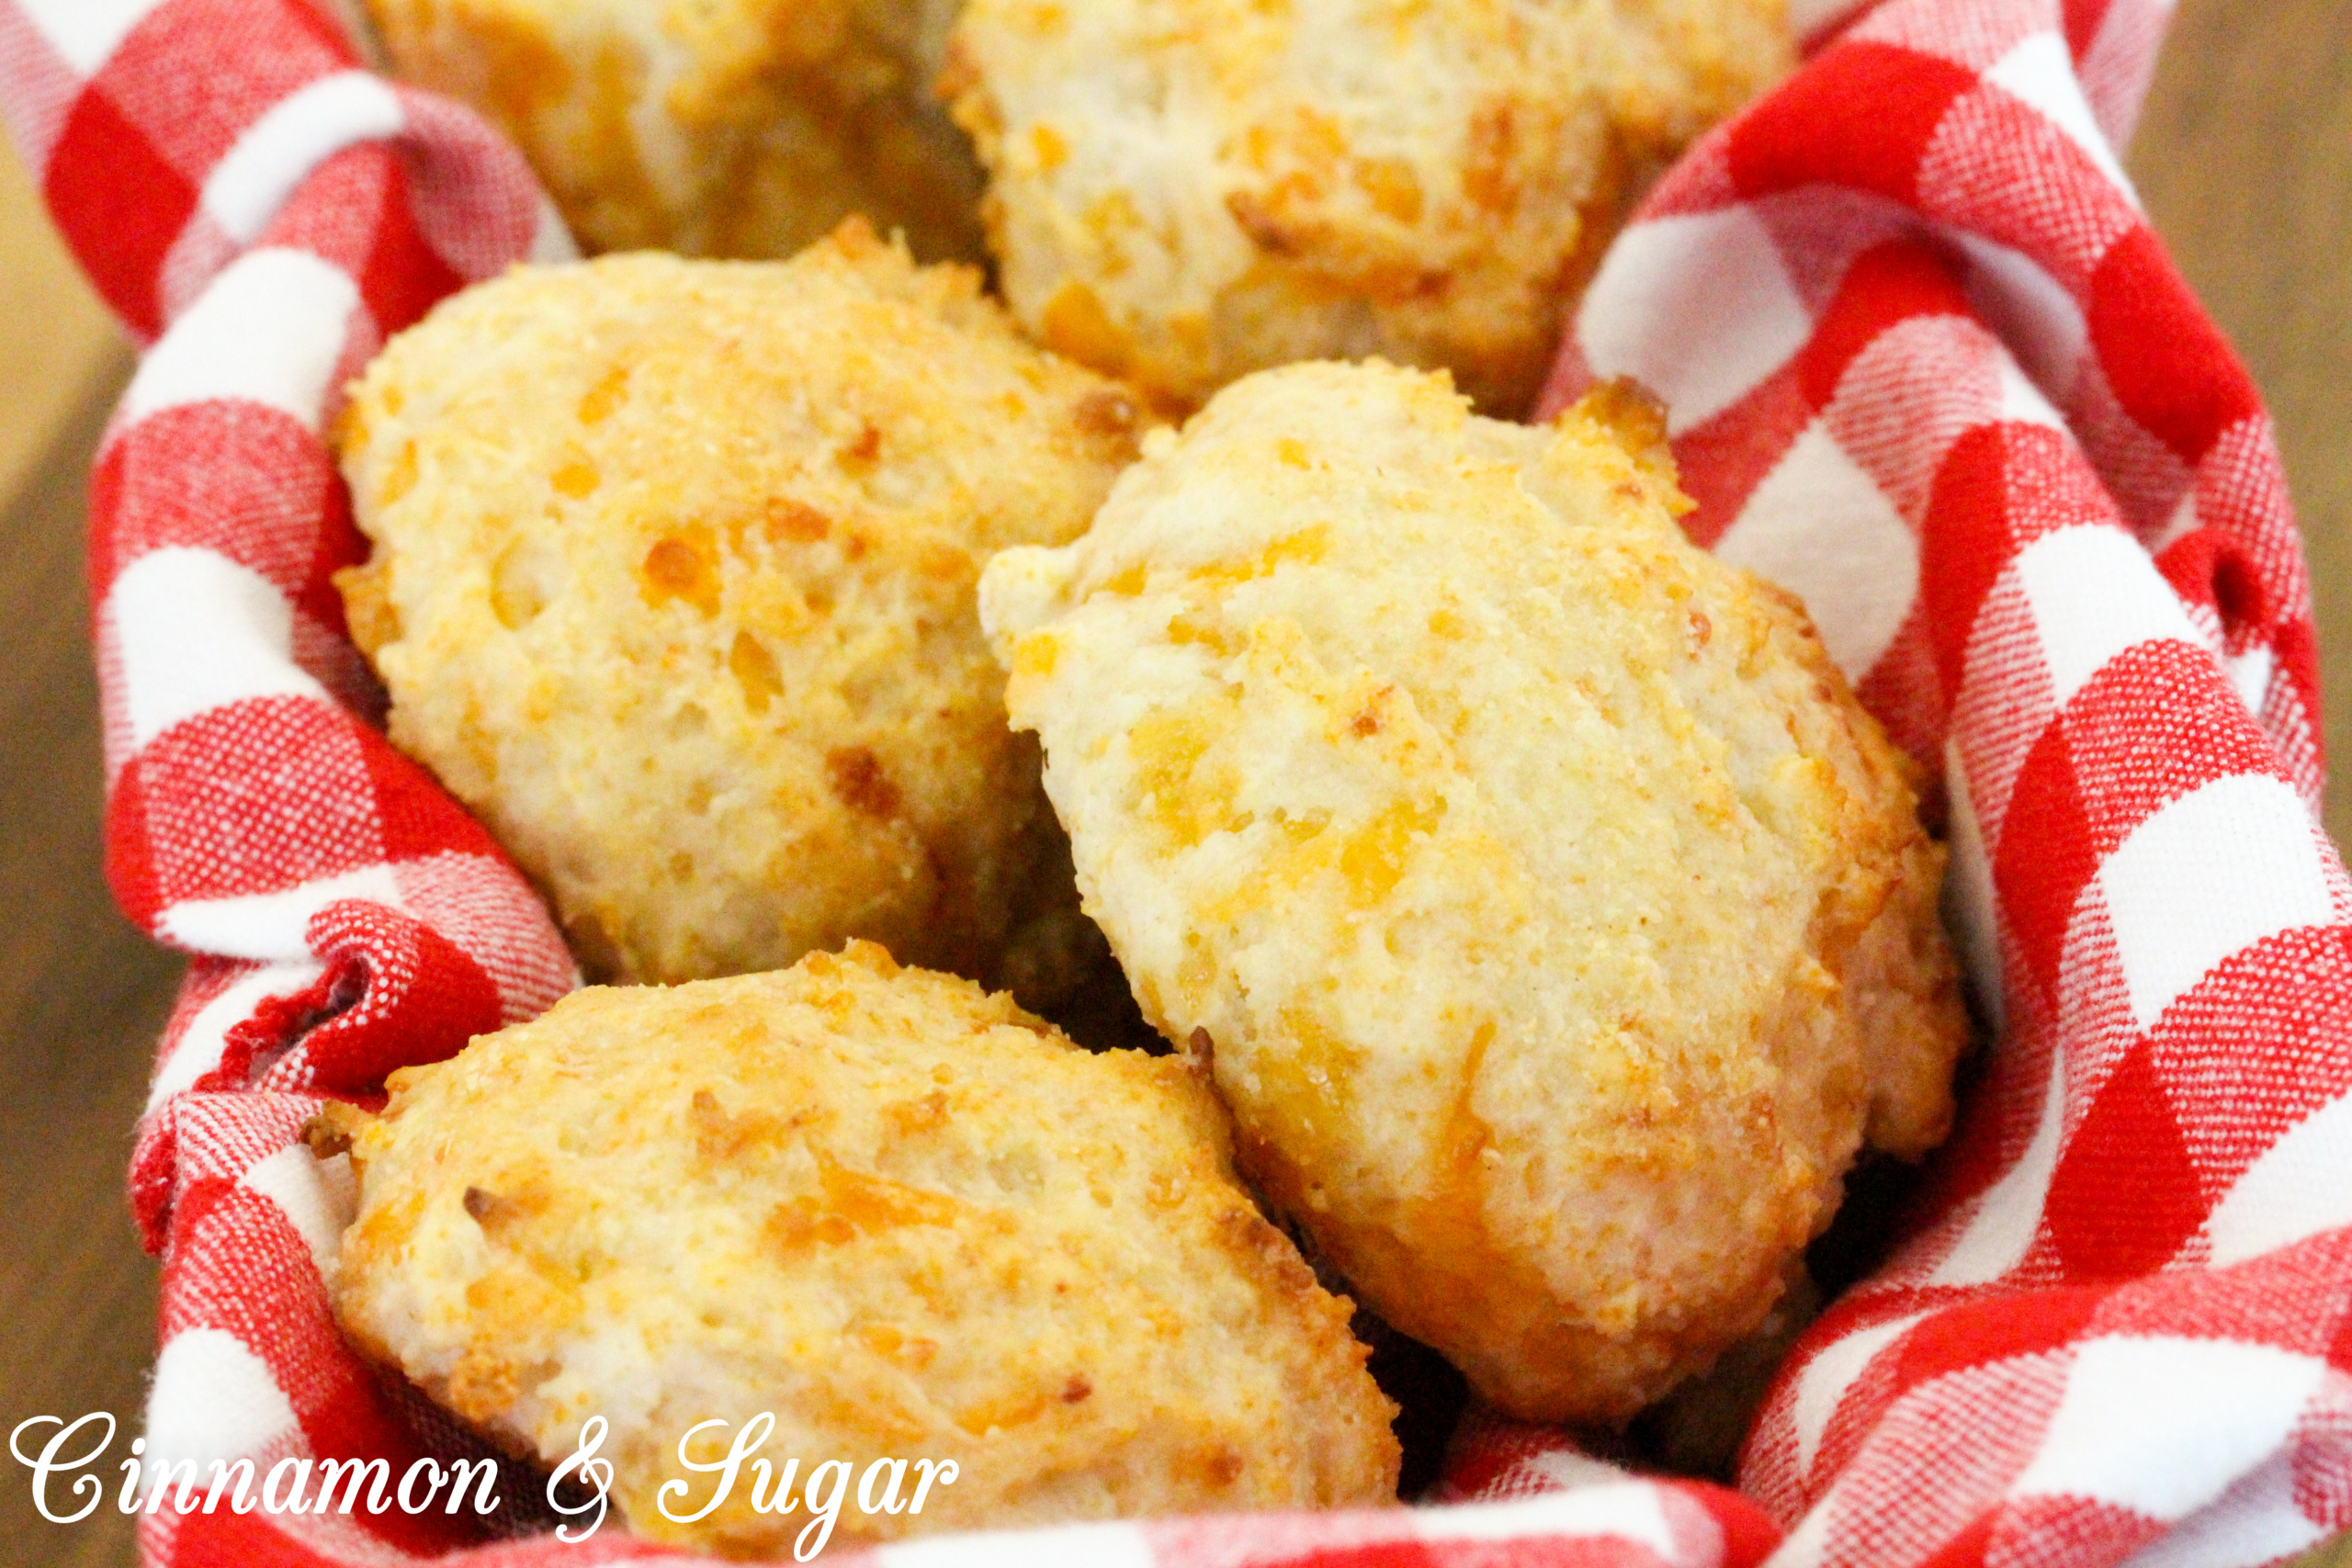 All that is required are a few simple ingredients, a few stirs in a bowl, a short bake and voilà, Garlic Cheese Biscuits provide a savory side that goes perfectly with soup or salaid. Recipe shared with permission granted by Nancy J. Cohen, author of EASTER HAIR HUNT.